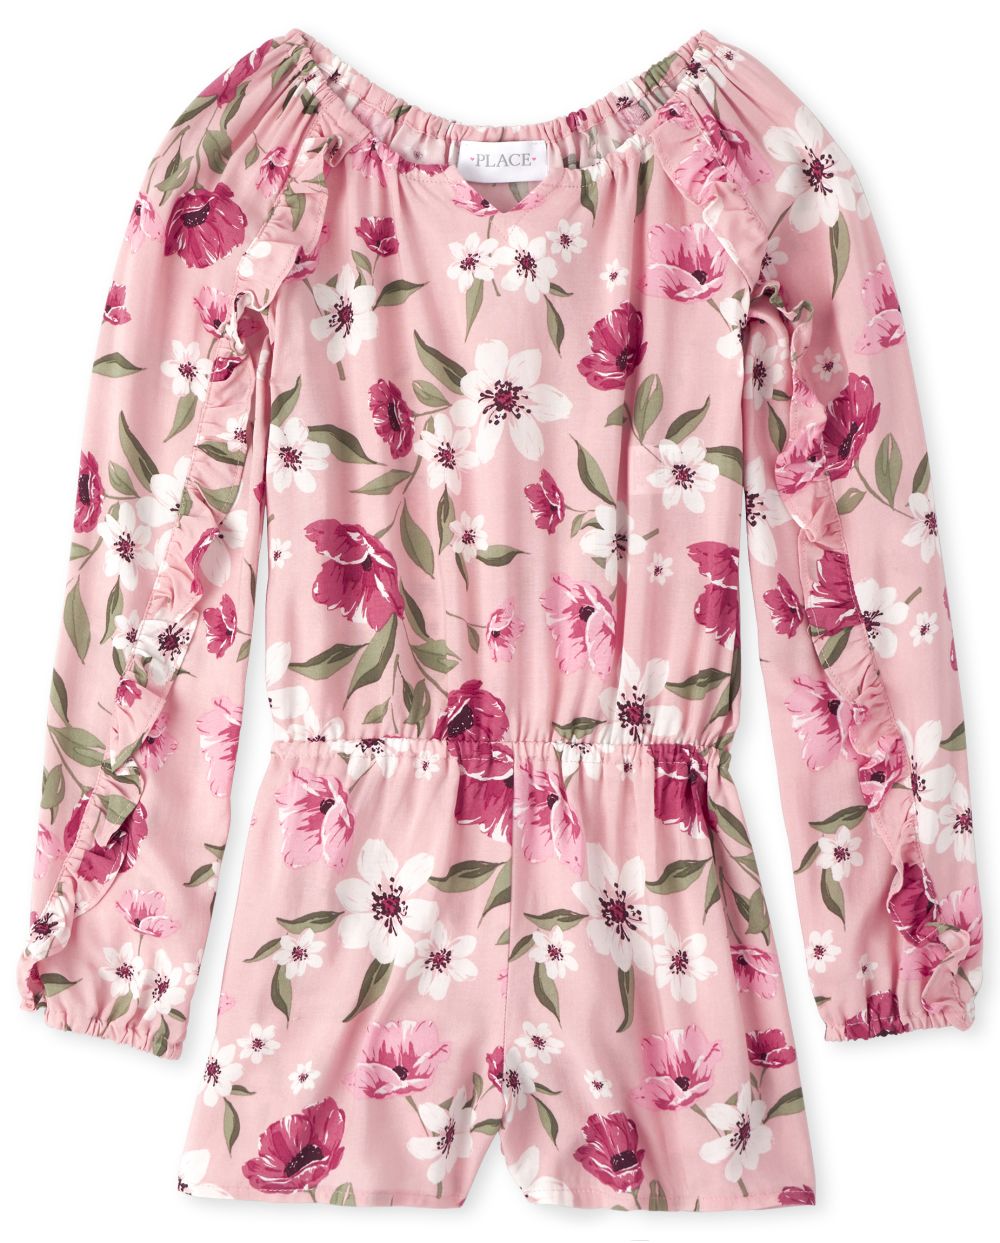 

Girls Floral Ruffle Romper - Pink - The Children's Place